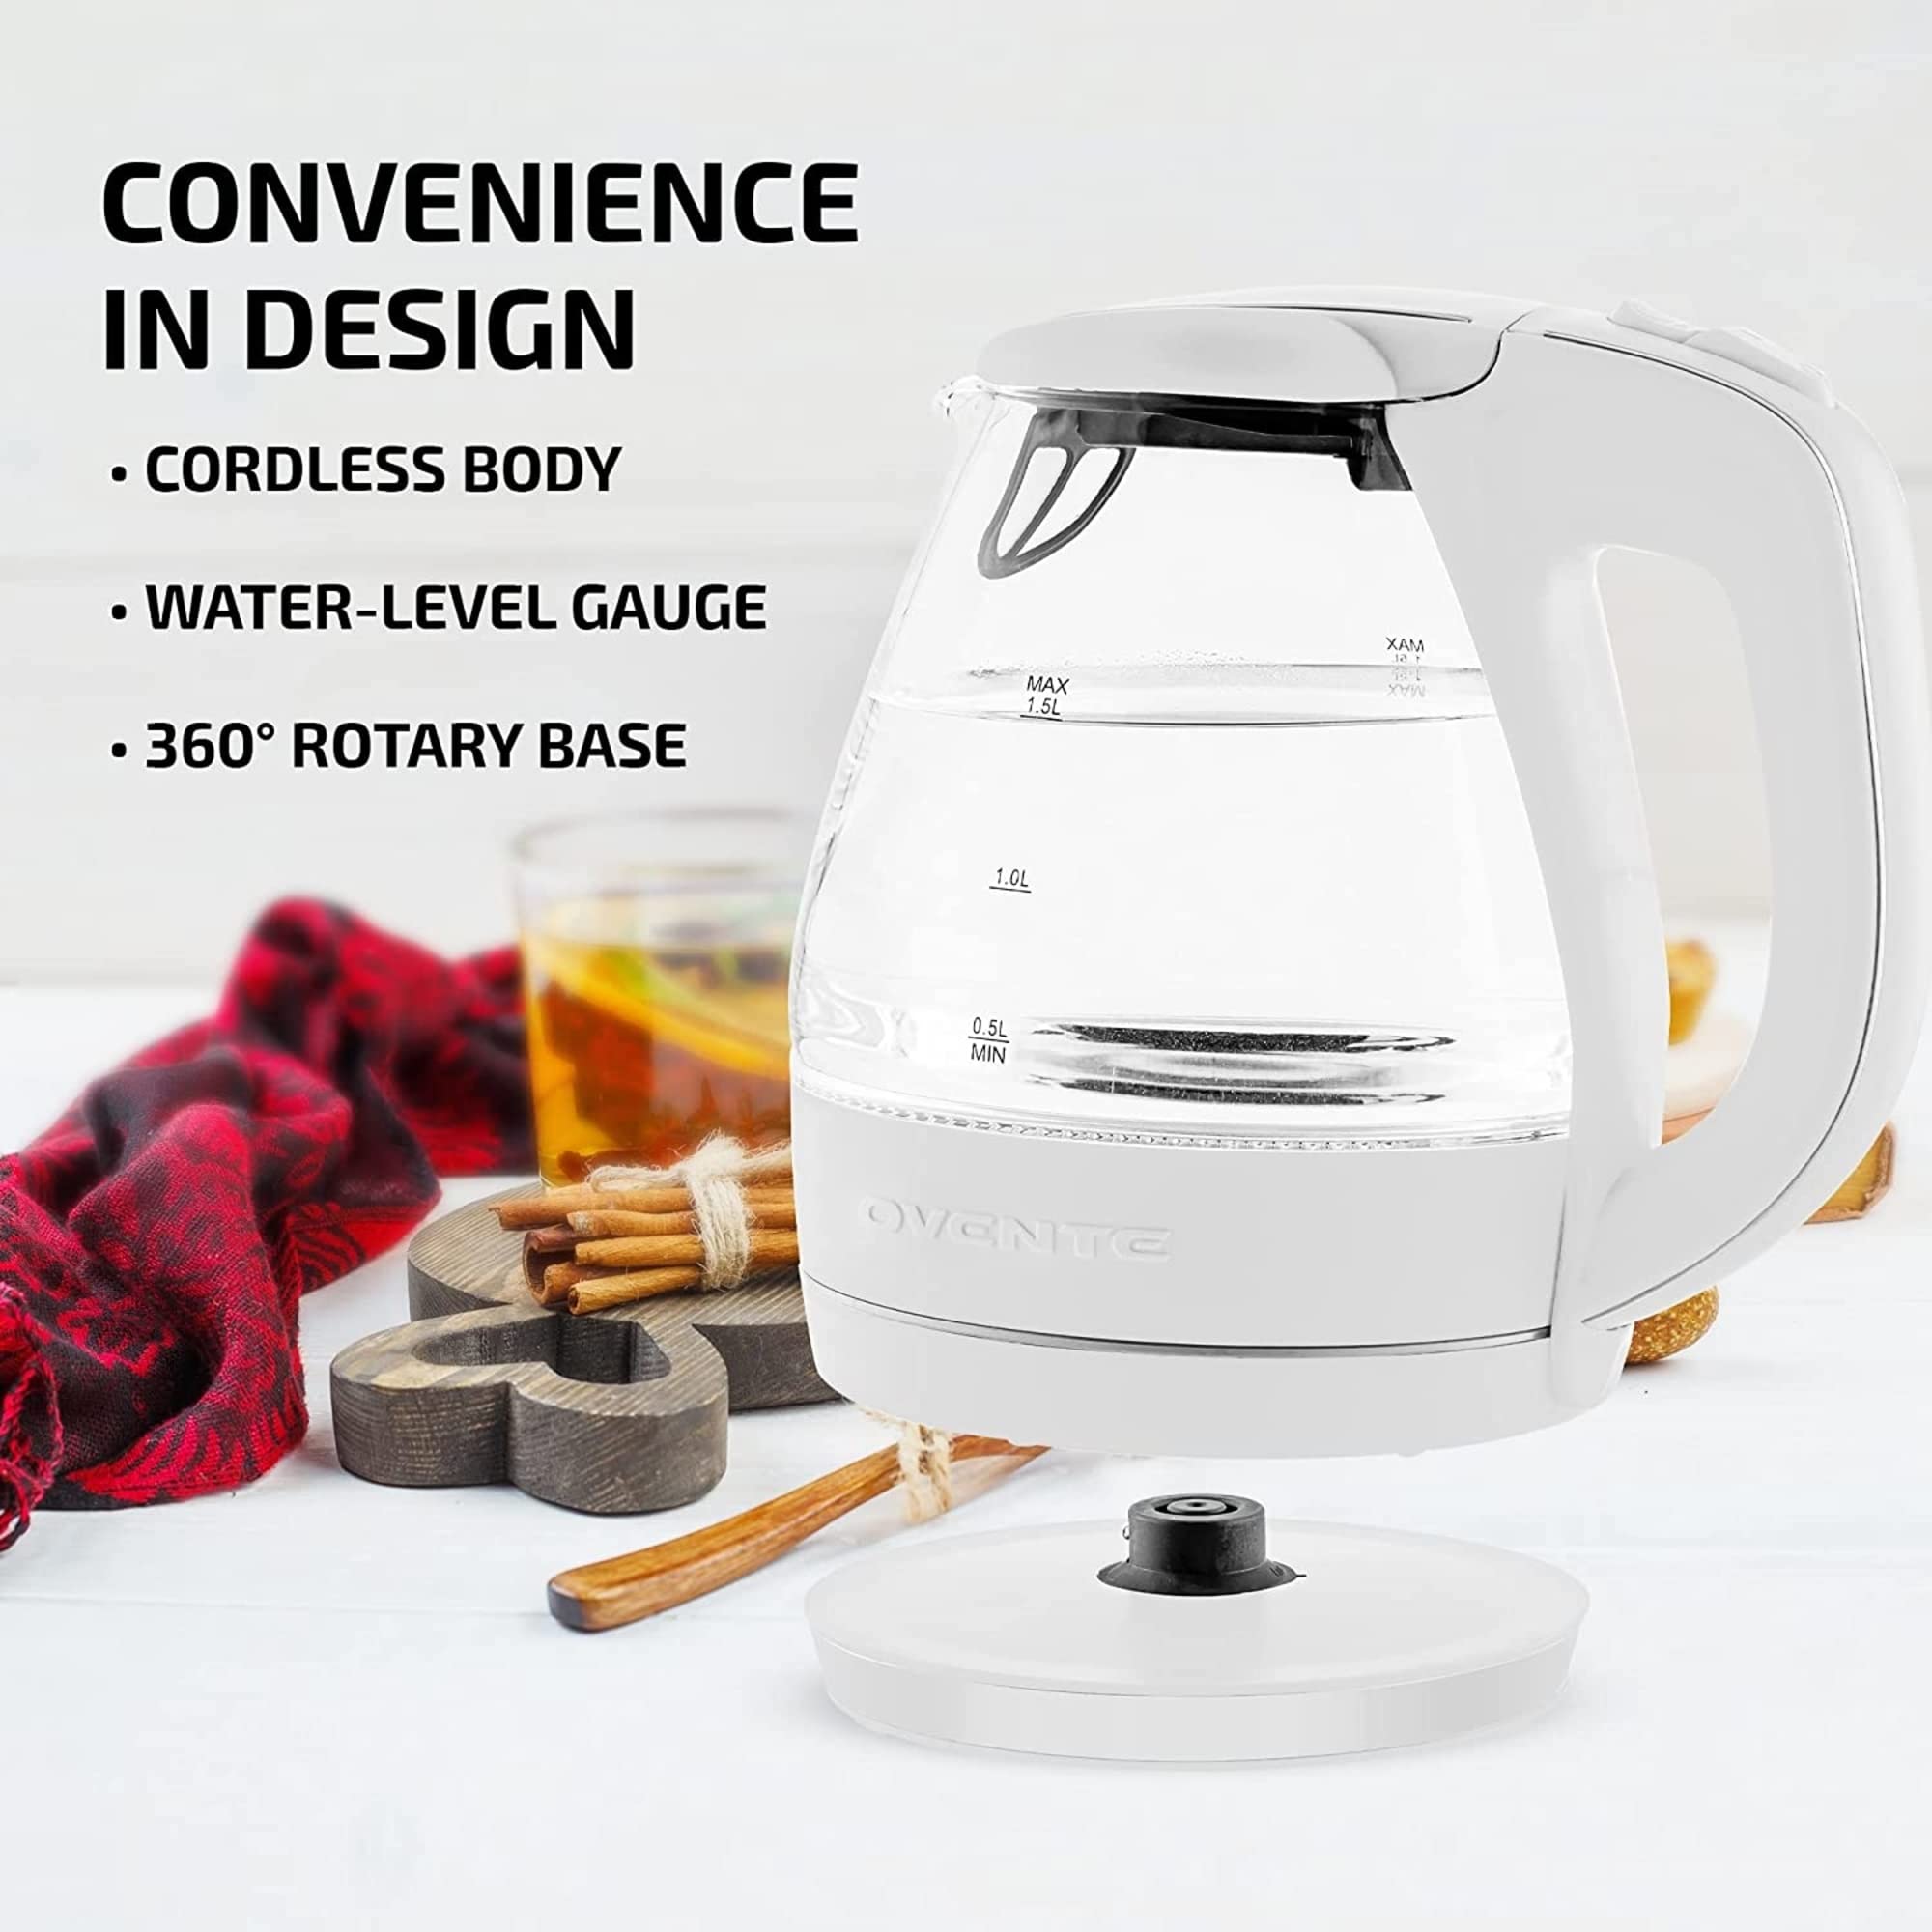 OVENTE Glass Electric Kettle Hot Water Boiler 1.5 Liter Borosilicate Glass Fast Boiling Countertop Heater - BPA Free Auto Shut Off Instant Water Heater Kettle for Coffee & Tea Maker - White KG83W